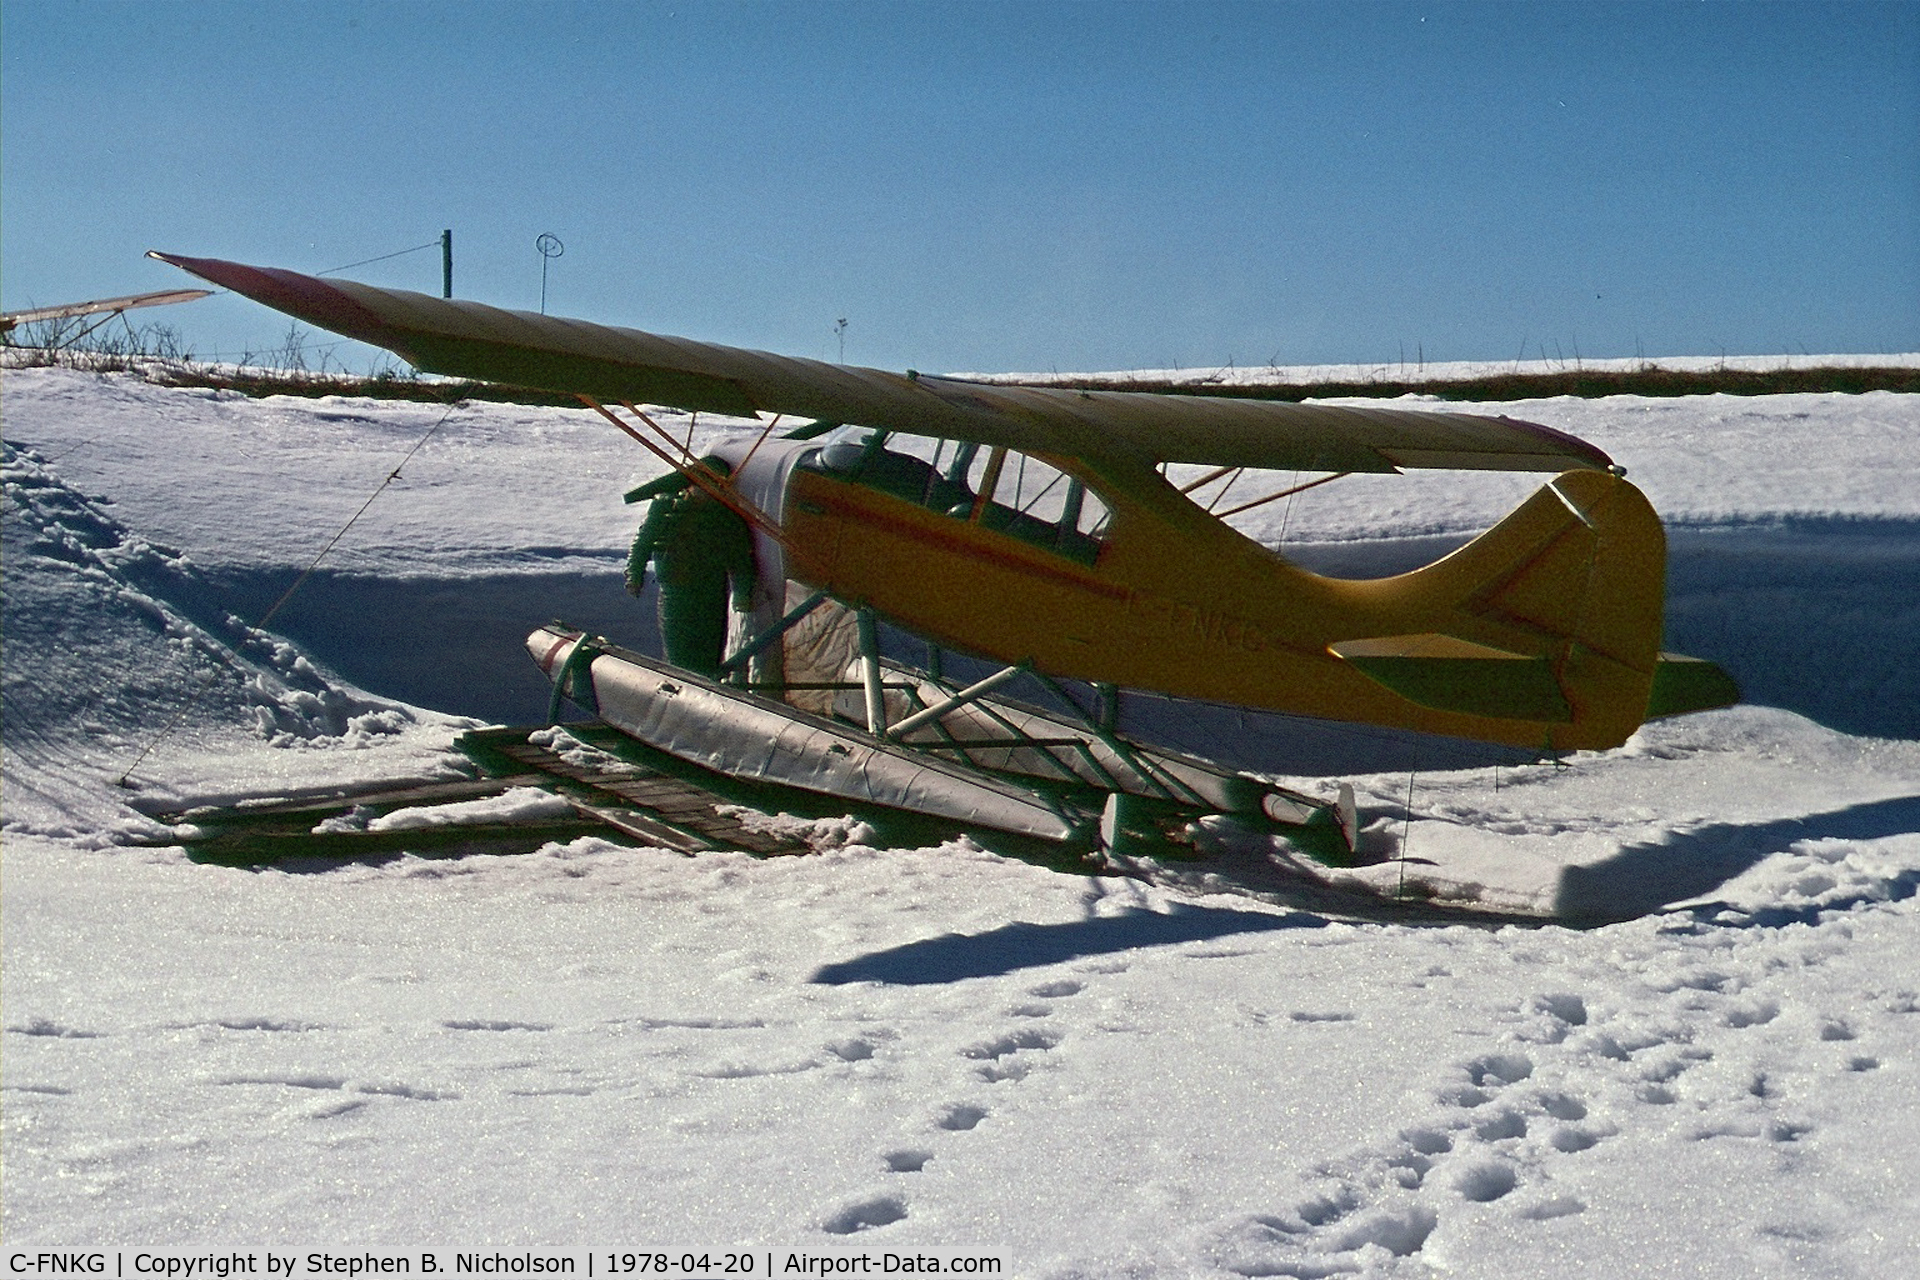 C-FNKG, 1955 Champion 7EC C/N 7EC 305, Seen in Dryden, Ontario pulled up on the shore of Wabigoon Lake on April 20, 1978. The photographer and Paul Boles were investigating its possible purchase for the Sioux Lookout Flying Club.